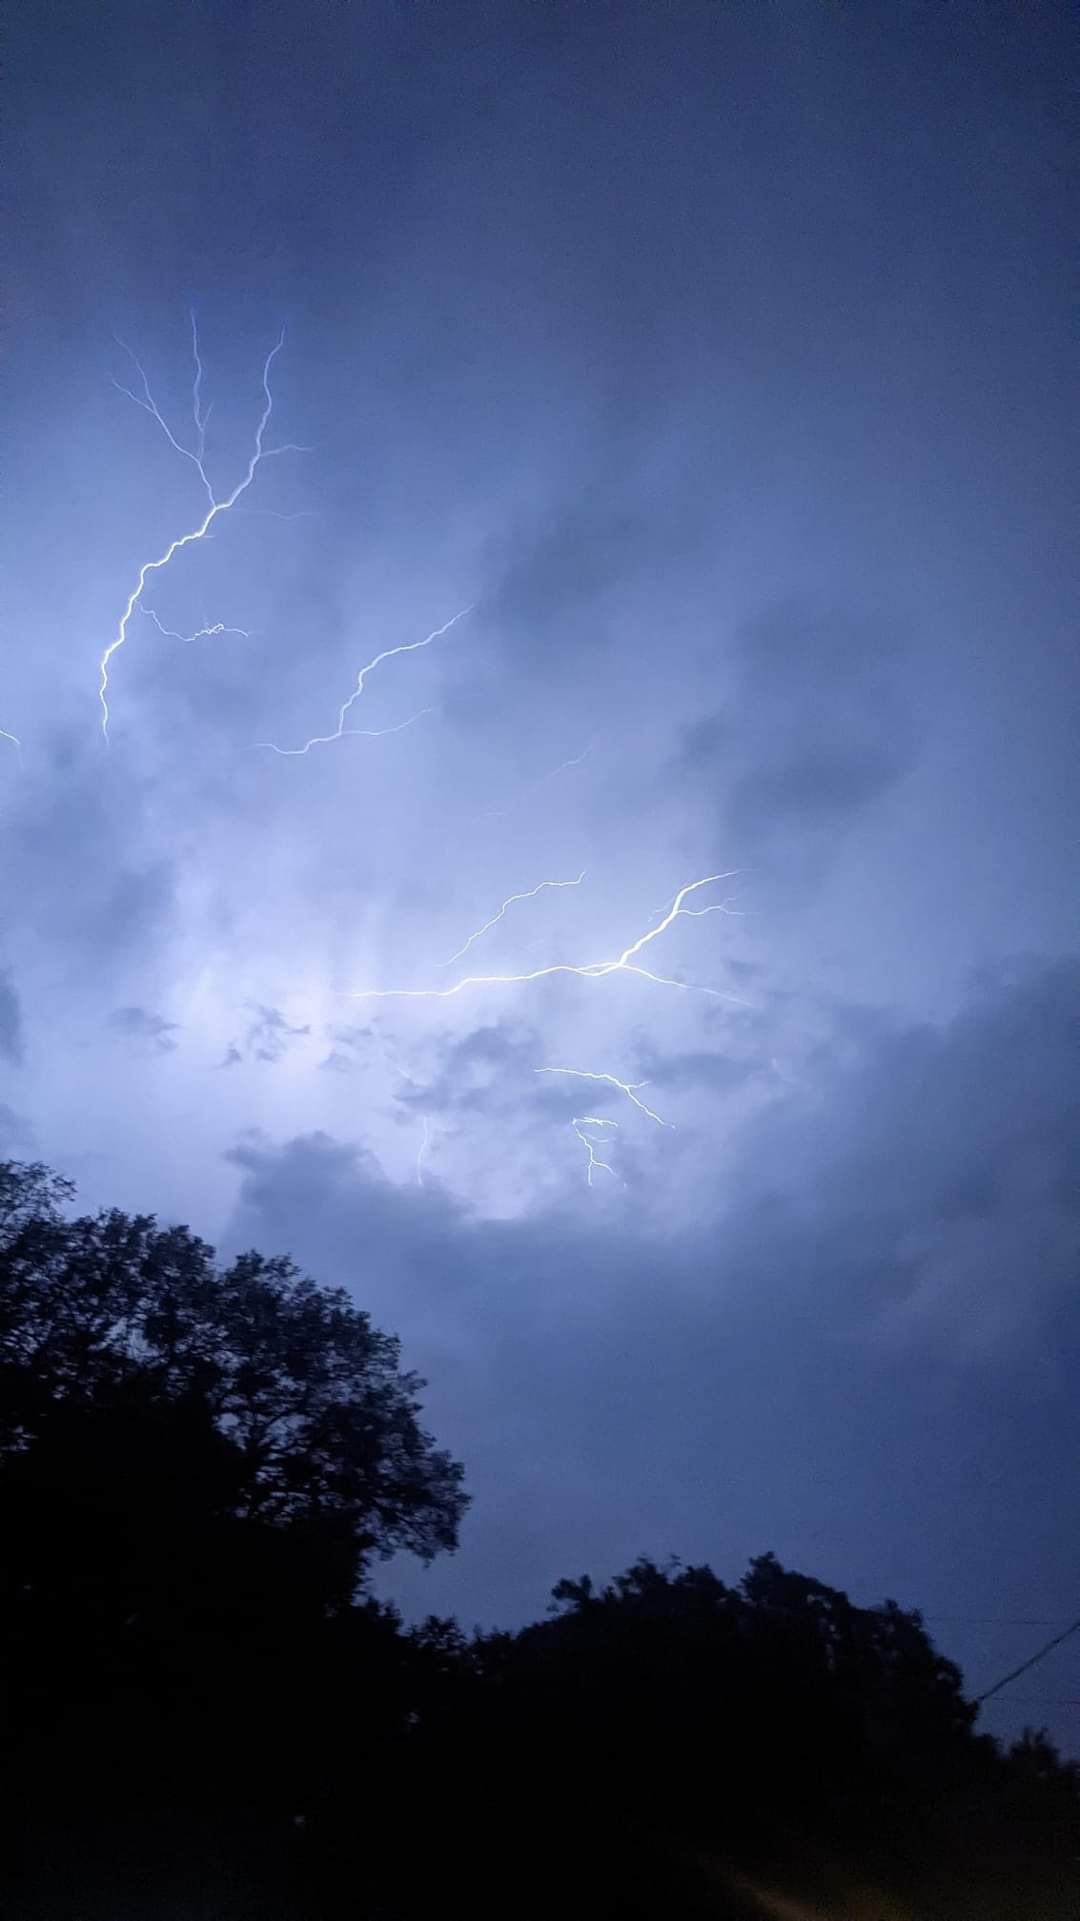 took this with my phone during a rain storm here in central Texas a few weeks ago